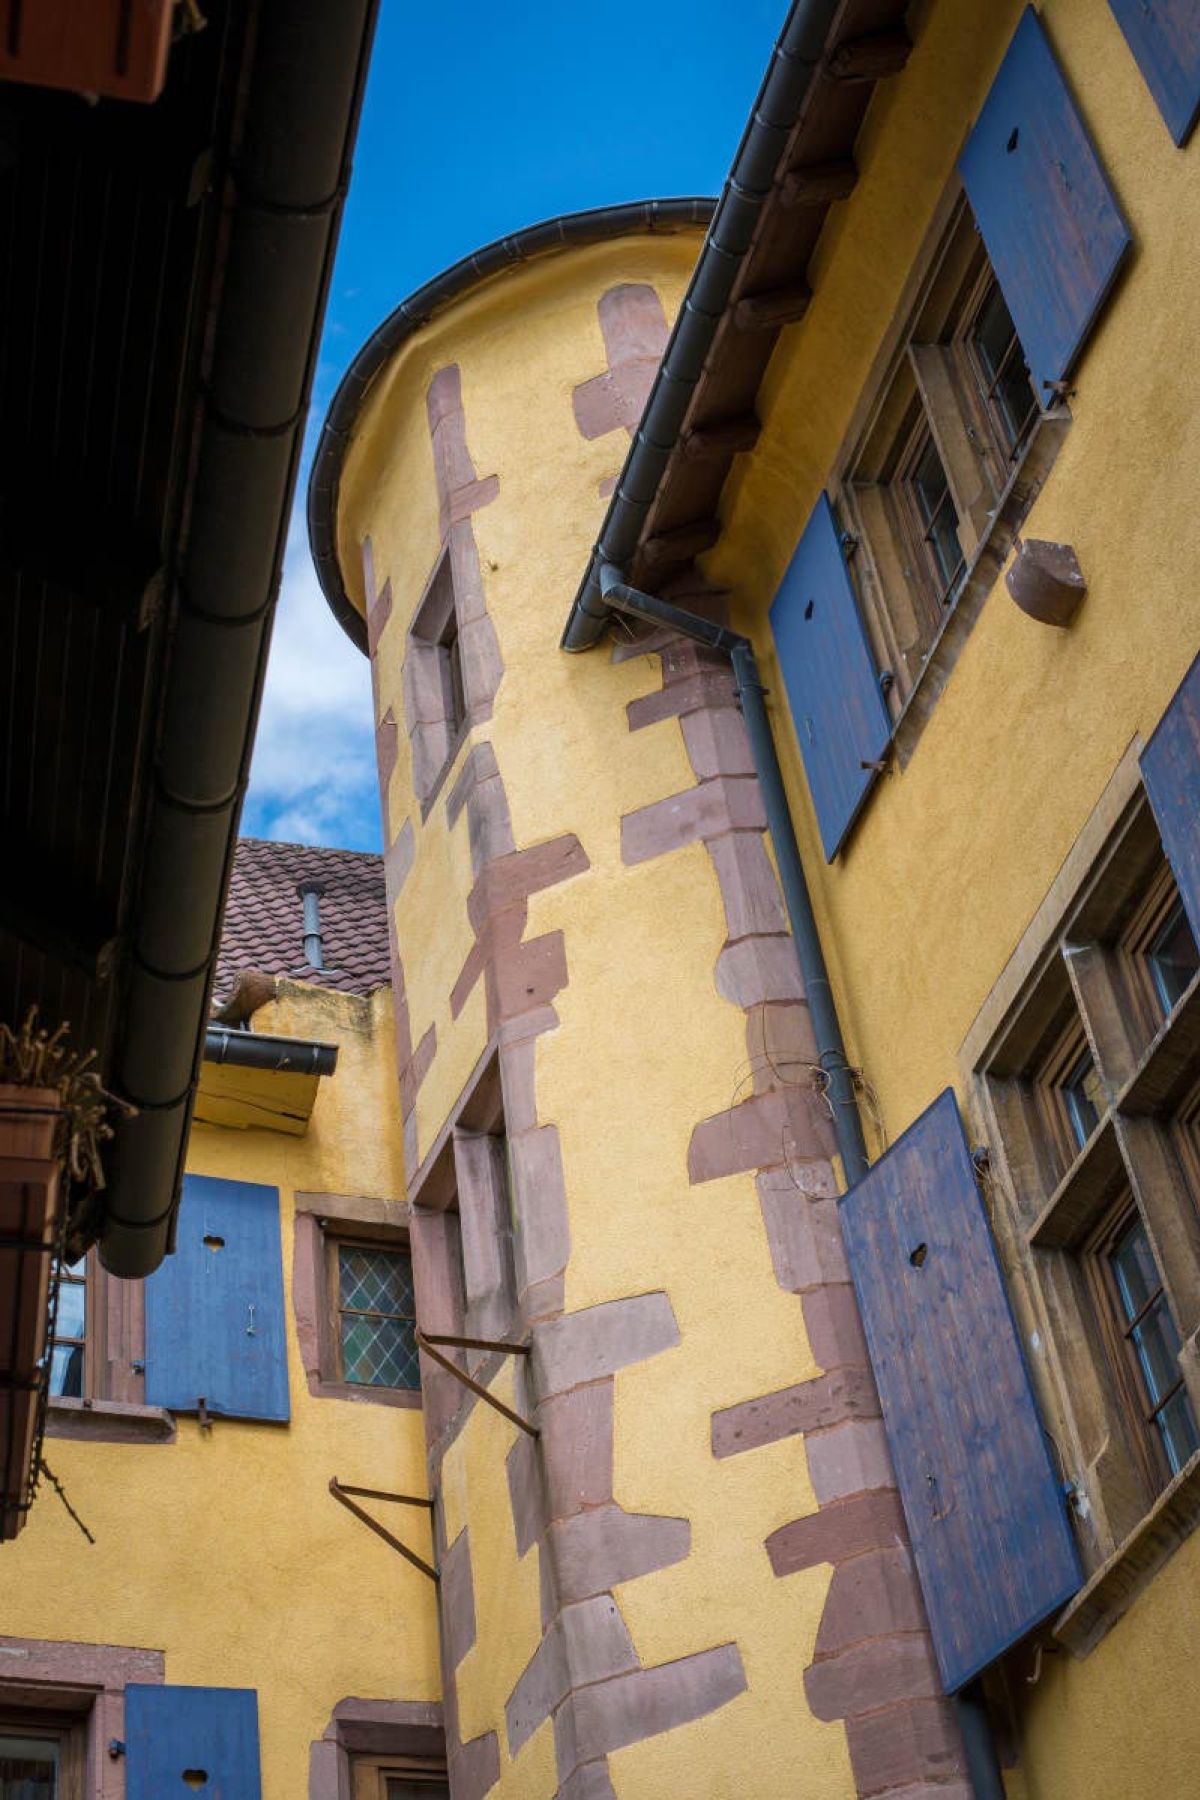 Hôtel La Couronne in Riquewihr : a hotel of charm on the Alsatian wine route, in the heart of the vineyard and a medieval village